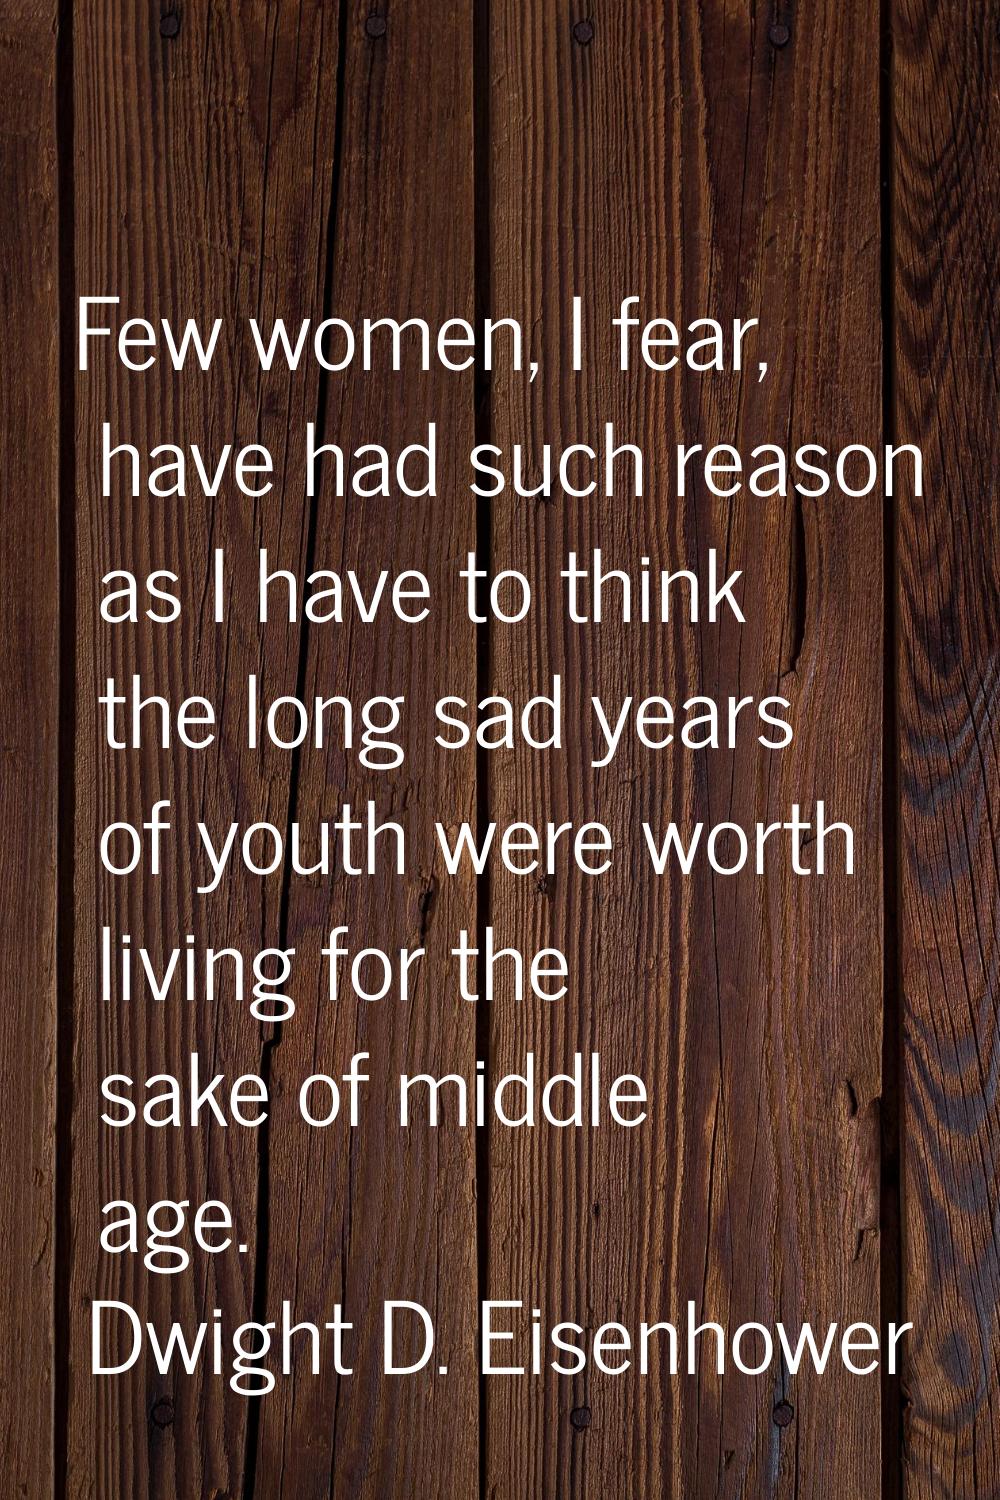 Few women, I fear, have had such reason as I have to think the long sad years of youth were worth l